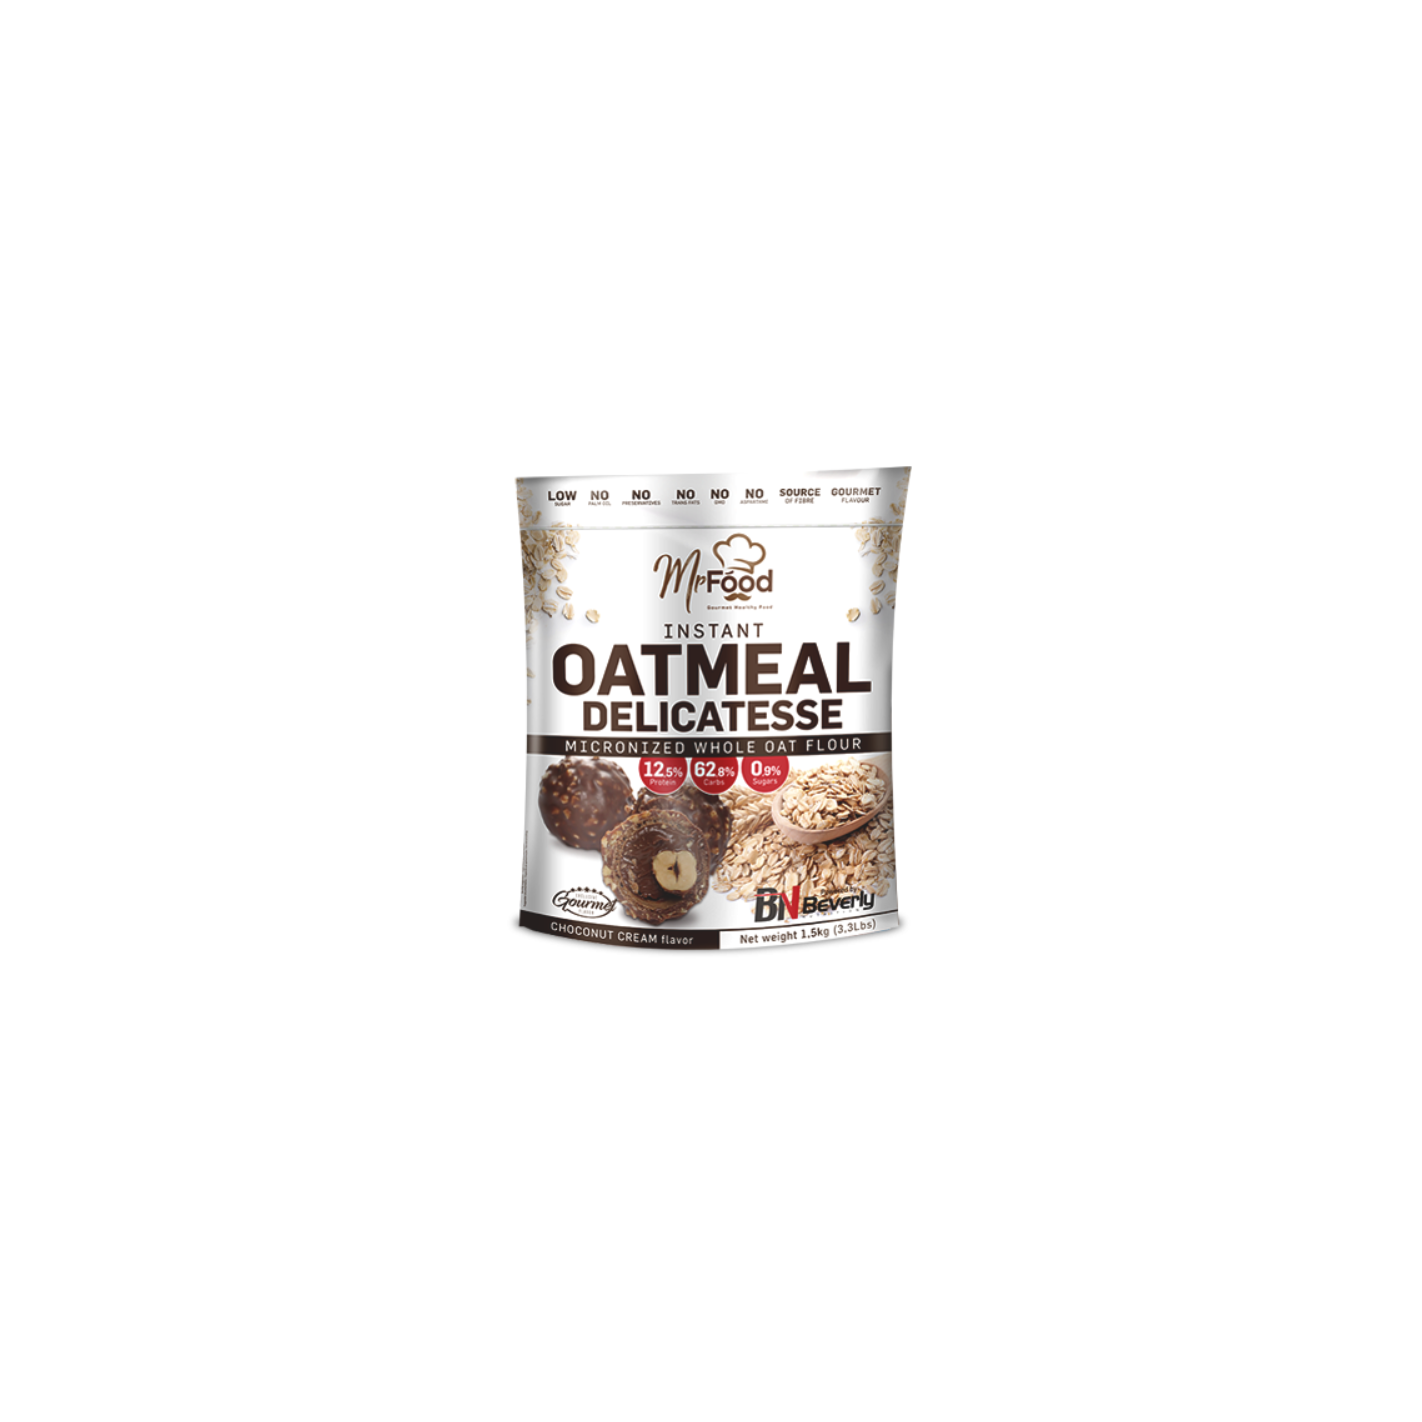 Mr Food Instant Oatmeal Delicatesse / 1500g